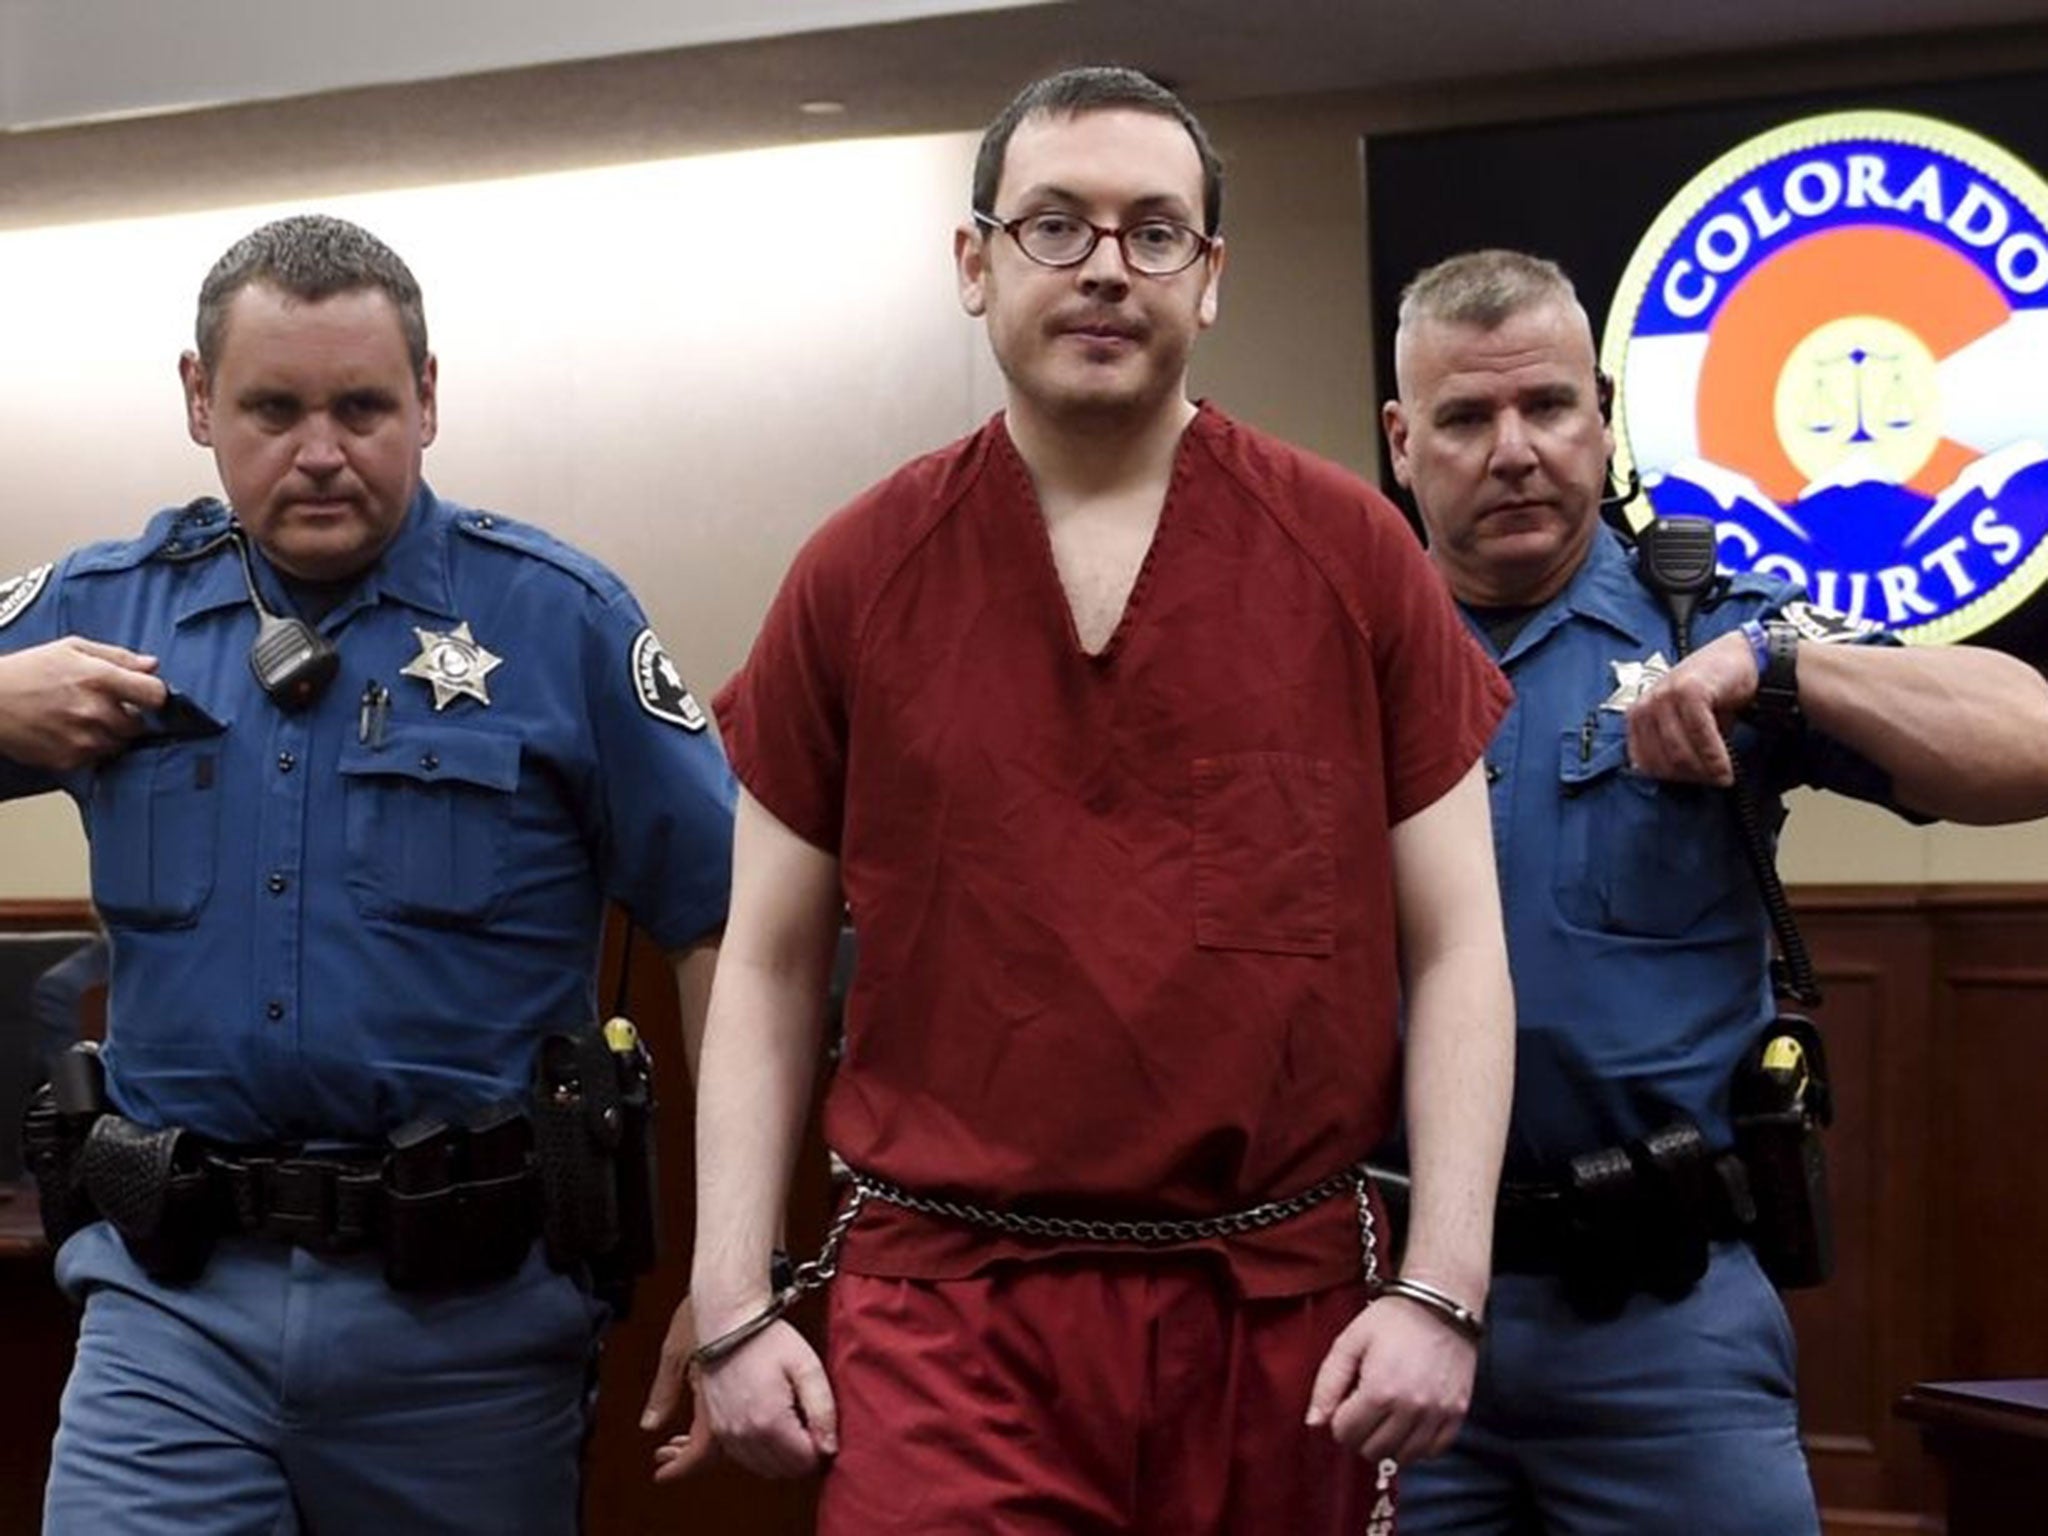 Colorado movie massacre gunman James Holmes (C) leaves court for the last time before beginning his life sentence with no chance of parole after a hearing in Centennial, Colorado August 26, 2015. The judge in the Colorado movie massacre trial will condemn